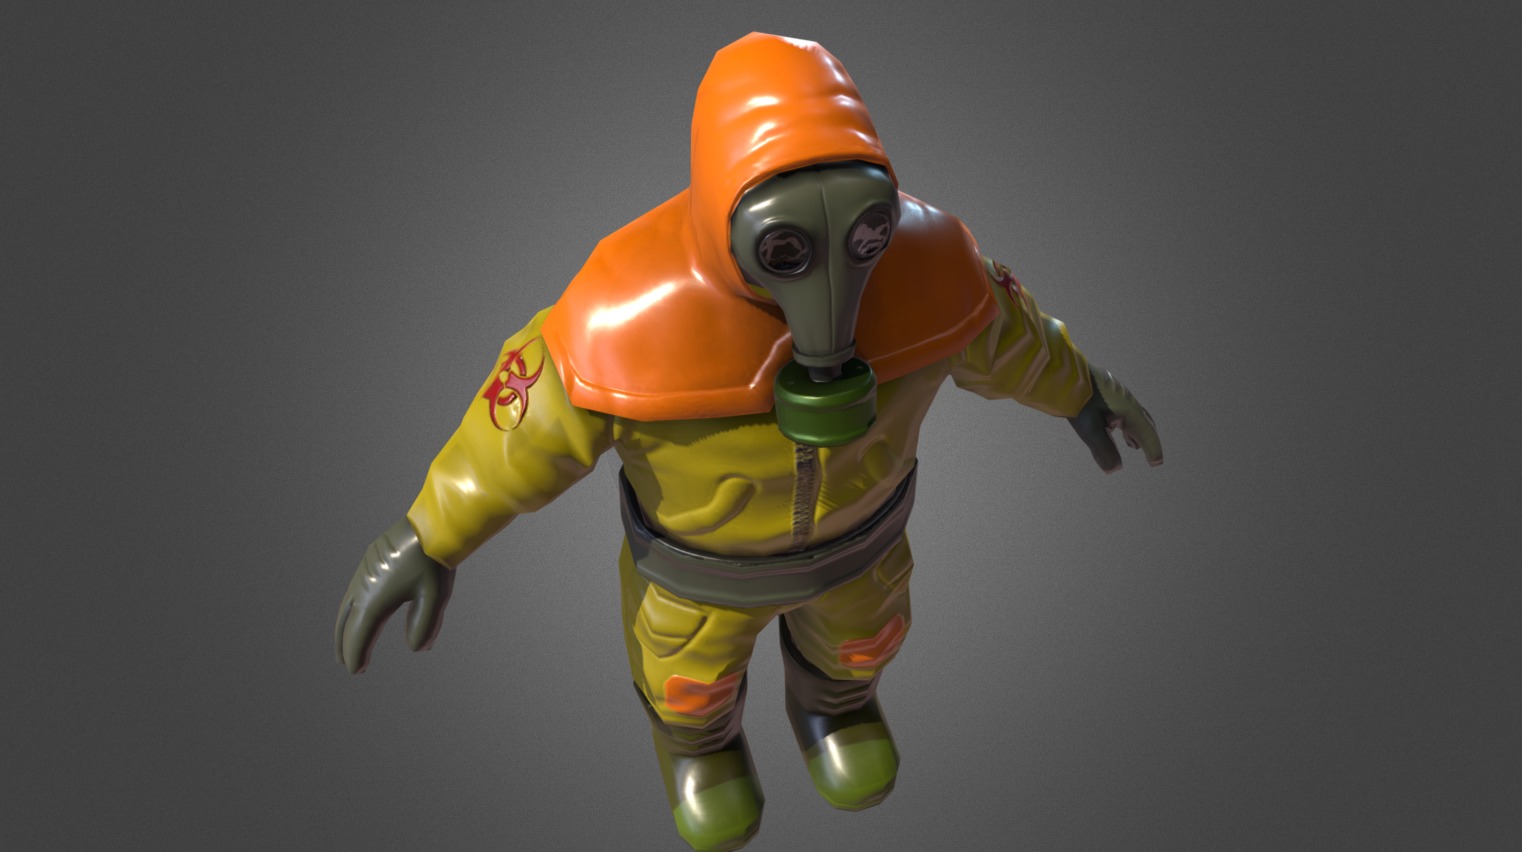 A game character I was working on for a concept. Low poly and stylized, game-ready 3d model